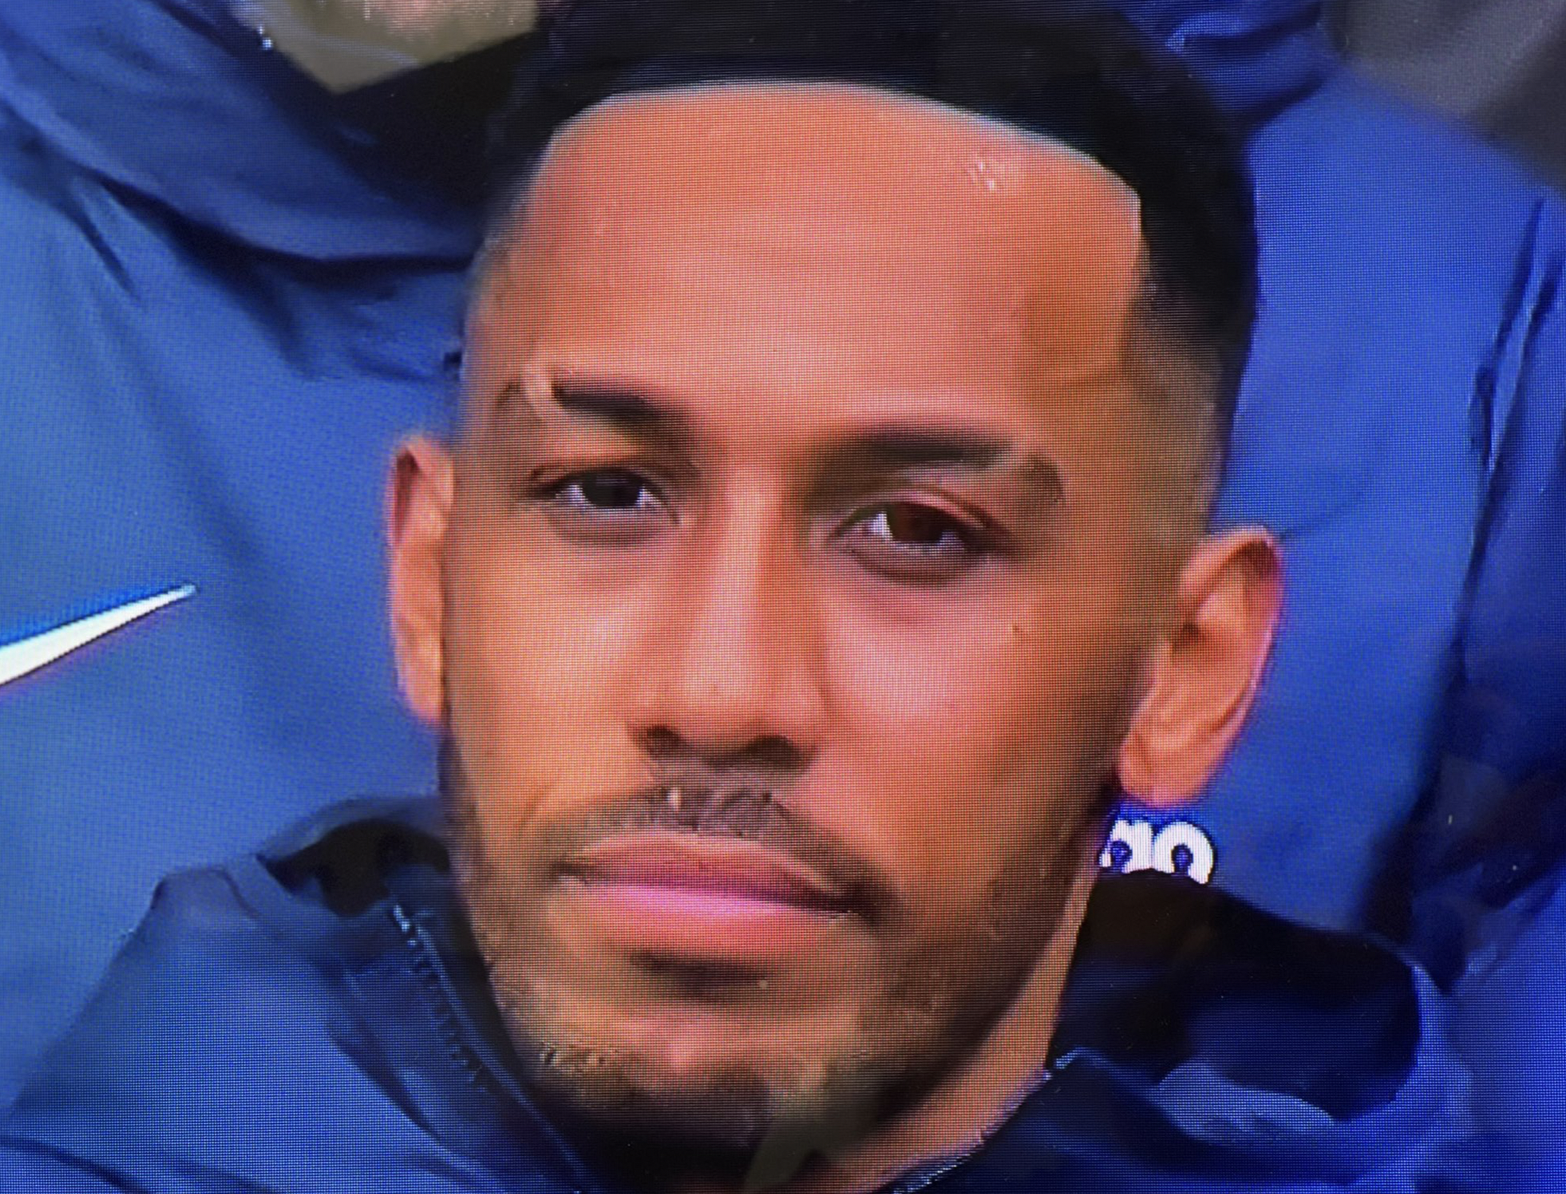 Arsenal supporters react to 'I'm Blue' Aubameyang after Gunners win at Chelsea